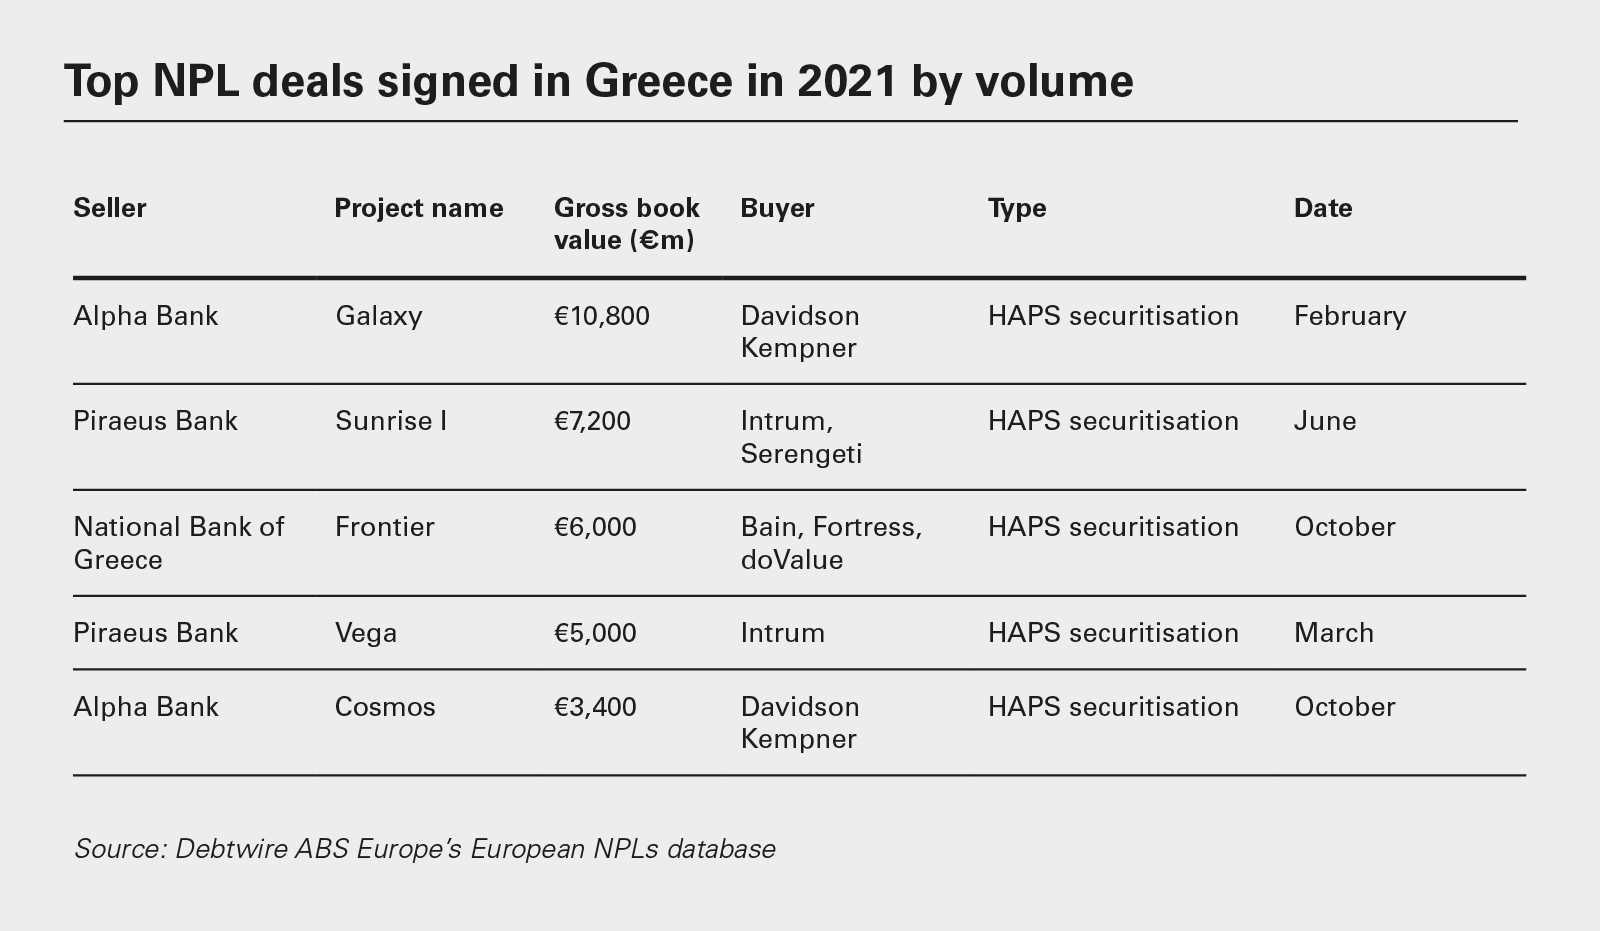 Top NPL deals signed in Greece in 2021 by volume